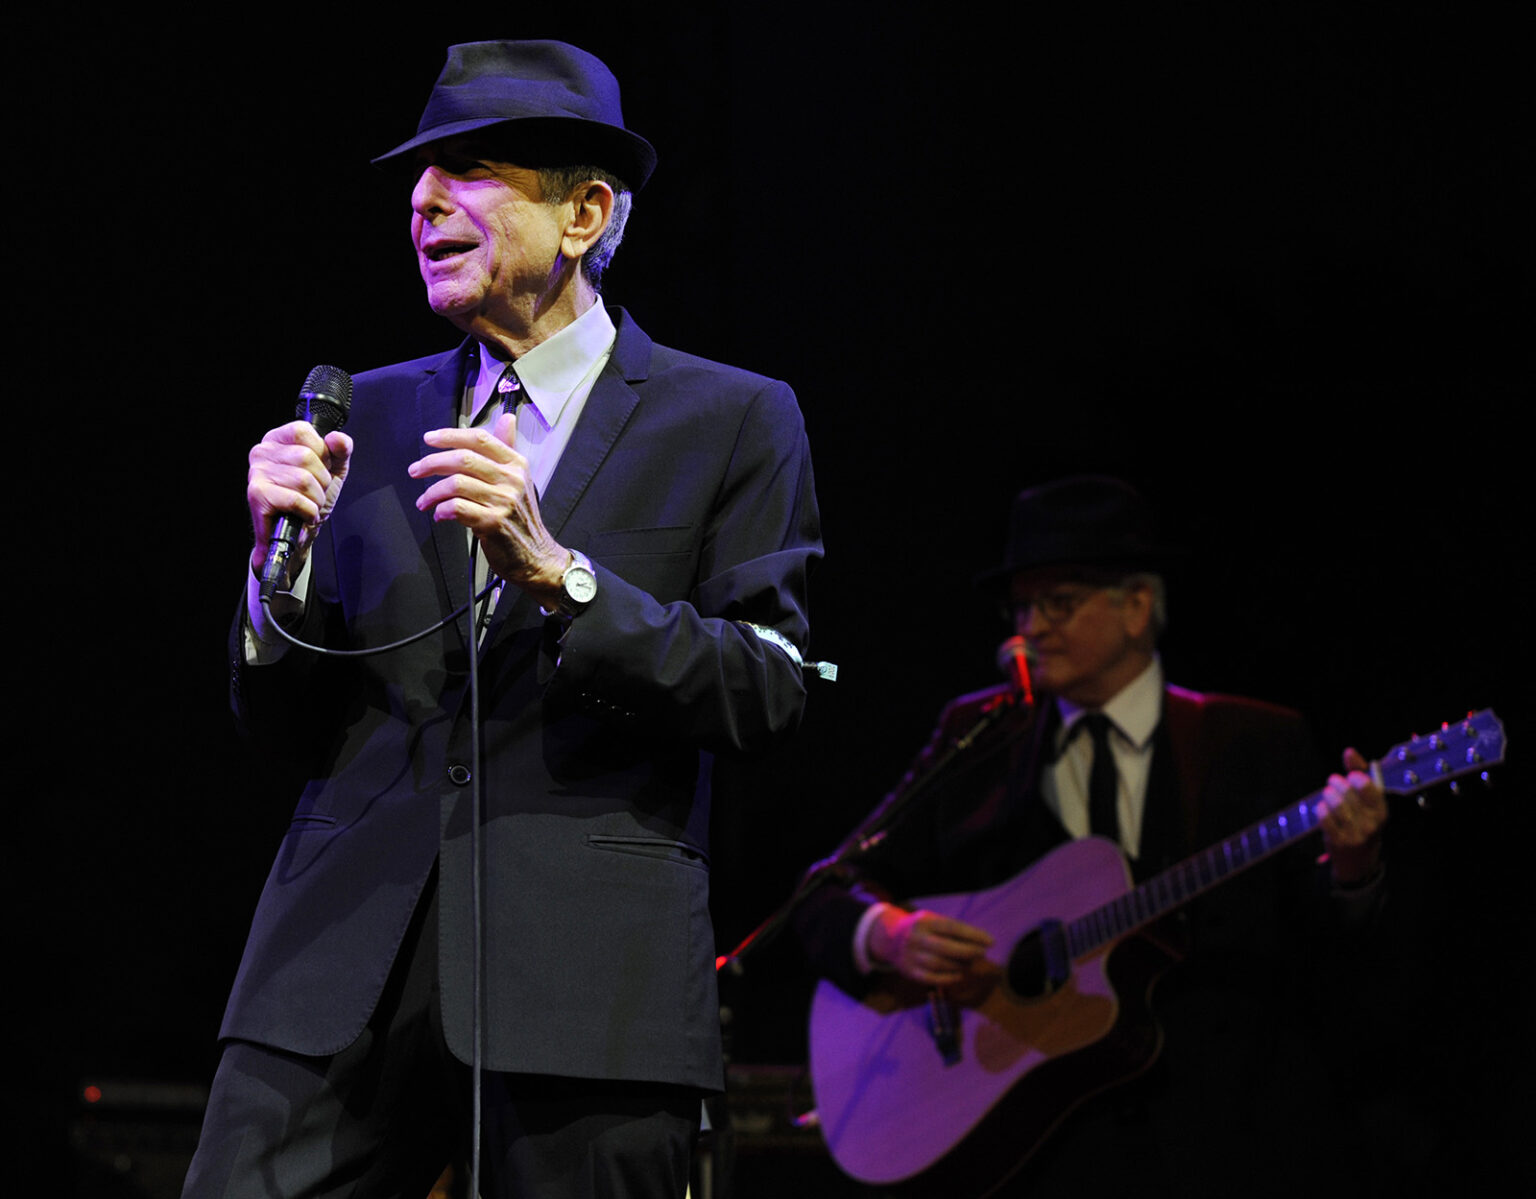 In this April 17, 2009, file photo, Leonard Cohen performs during the Coachella Valley Music & Arts Festival in Indio, Calif. (AP Photo/Chris Pizzello, File)